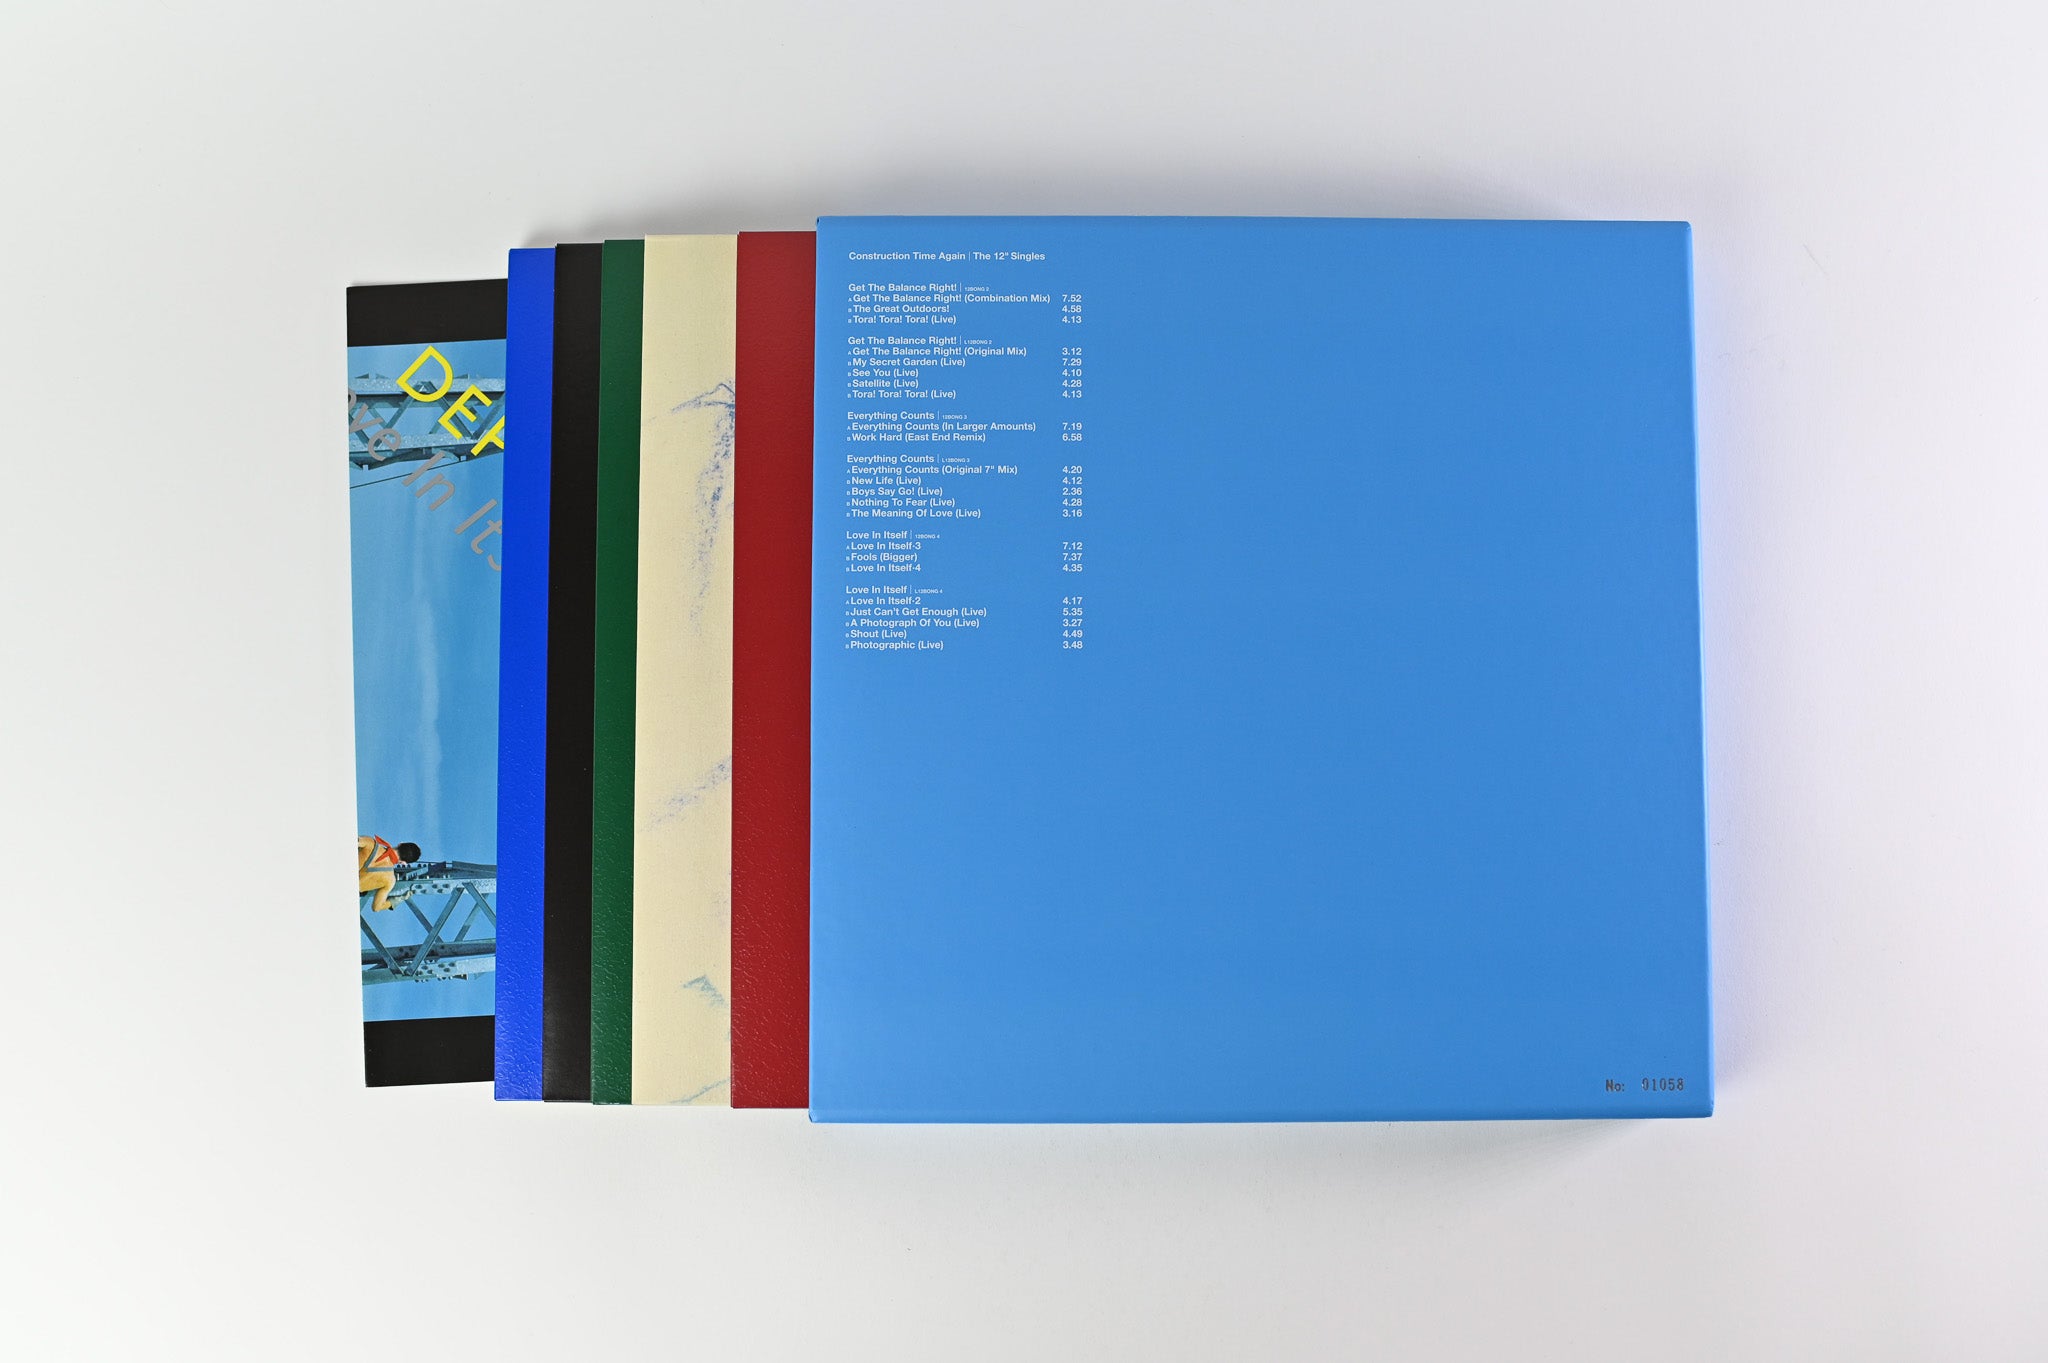 Depeche Mode - Construction Time Again | The 12" Singles on Mute Rhino Ltd Numbered Box Set